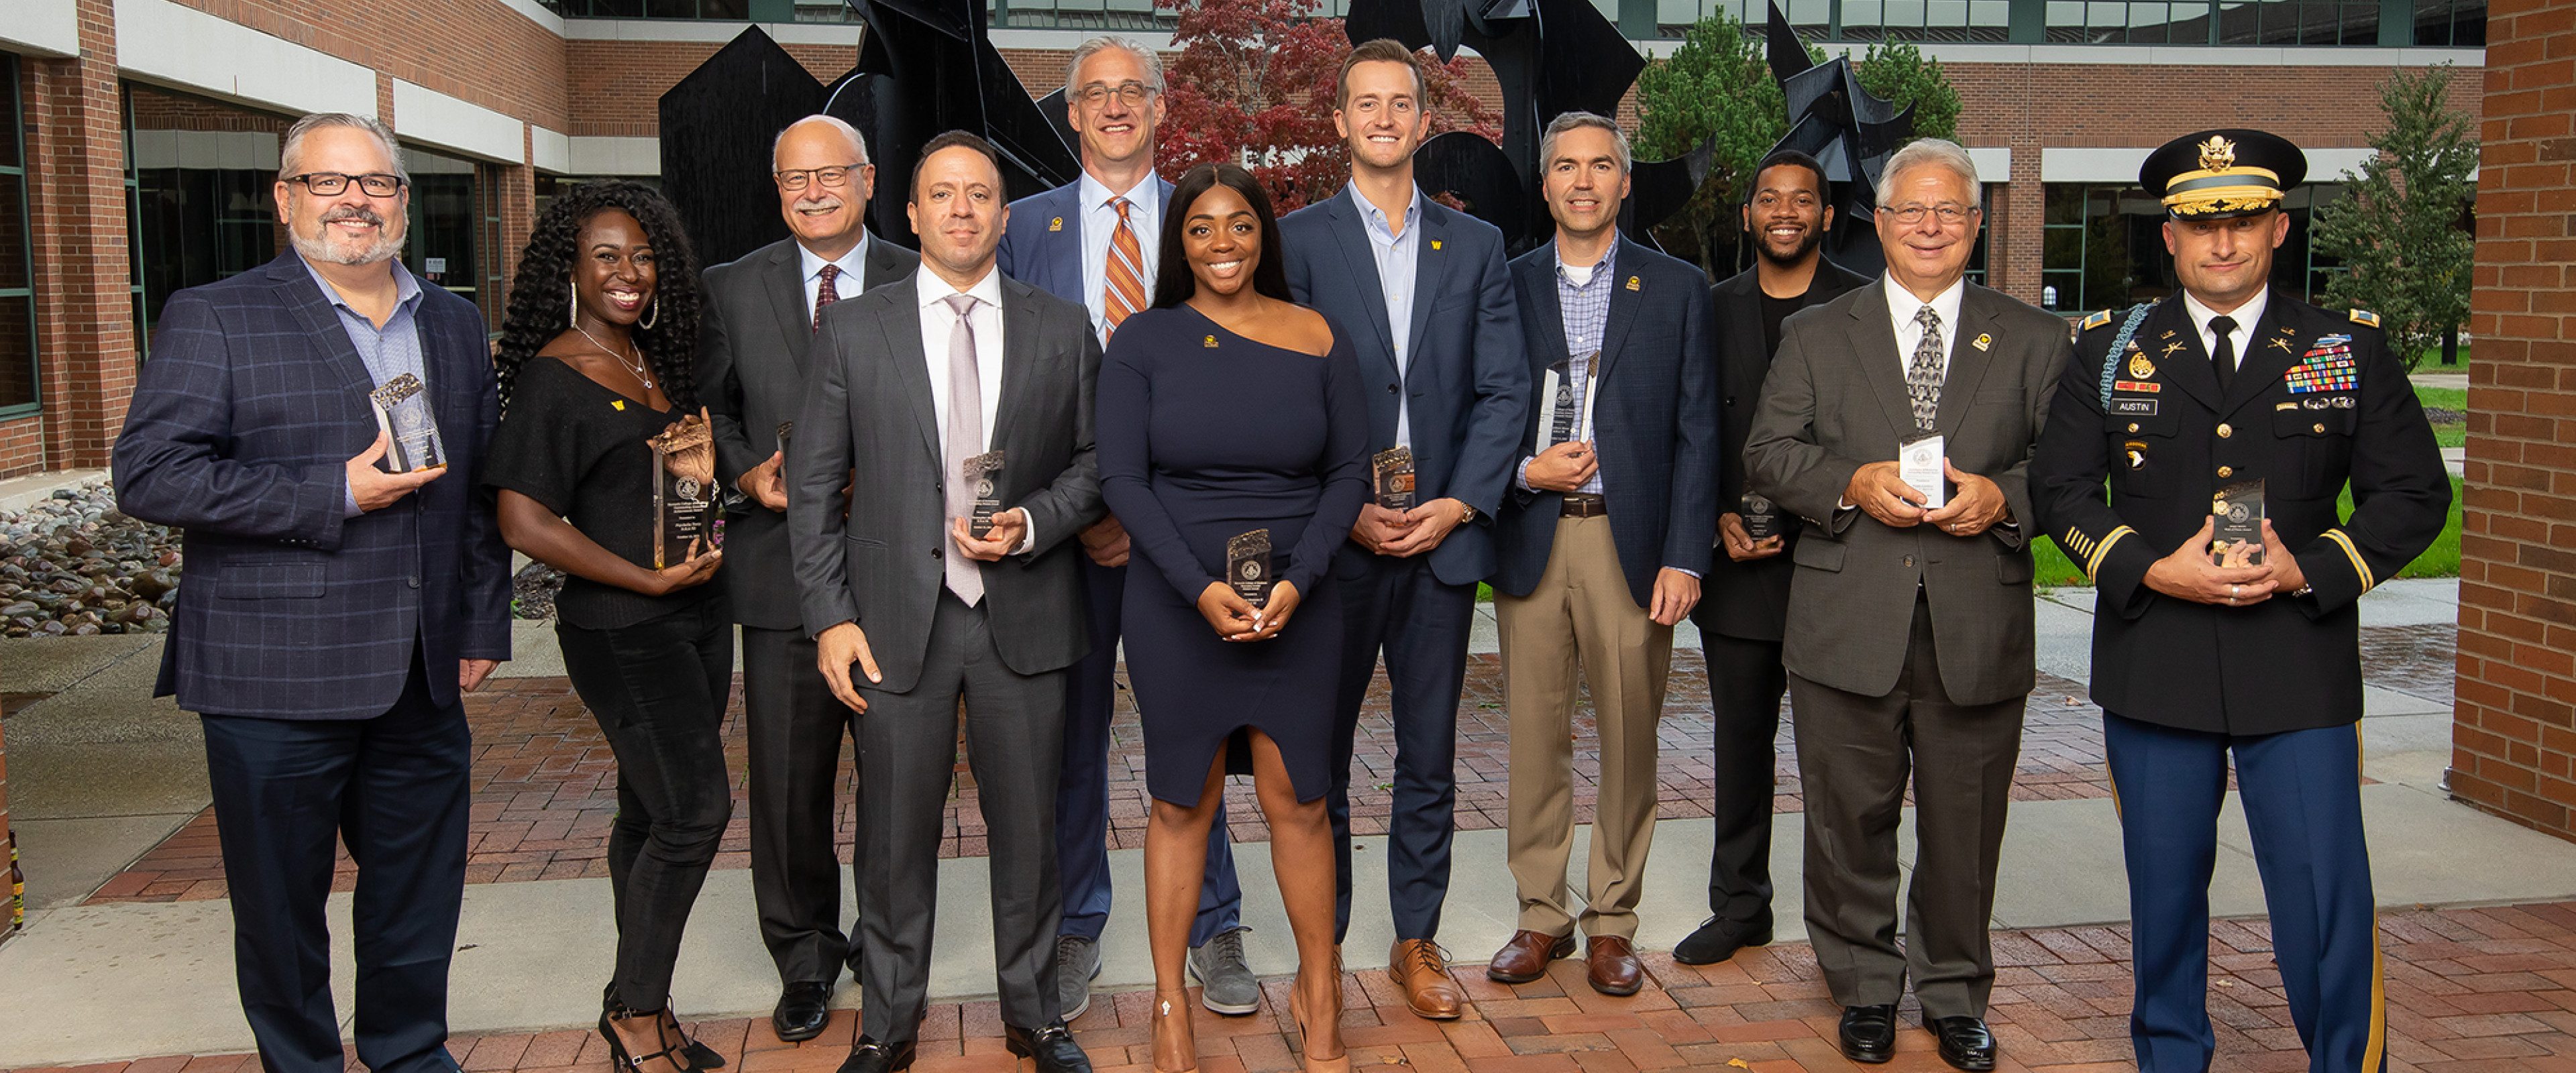 11 WMU Haworth alumni pose with their awards, outside of the Haworth College of Business